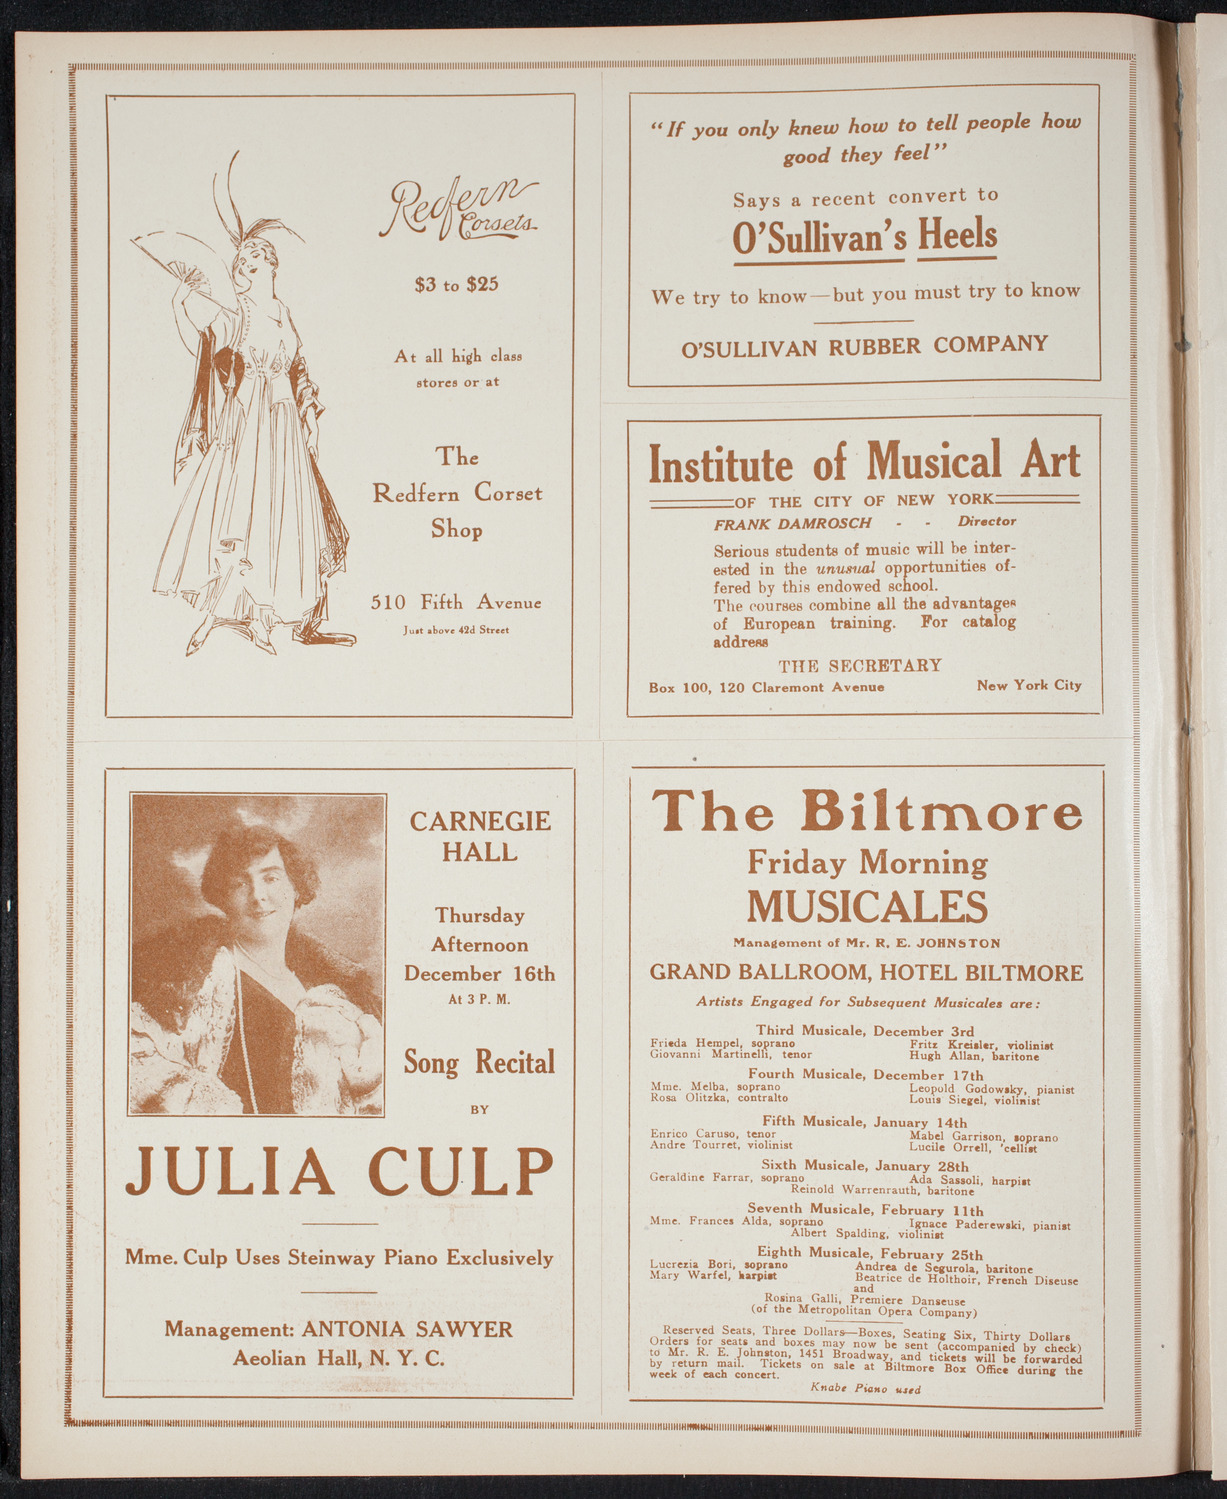 Roy Chandler's South American Series: Spring Byington-Chandler "A Trip to the Argentine", November 24, 1915, program page 2